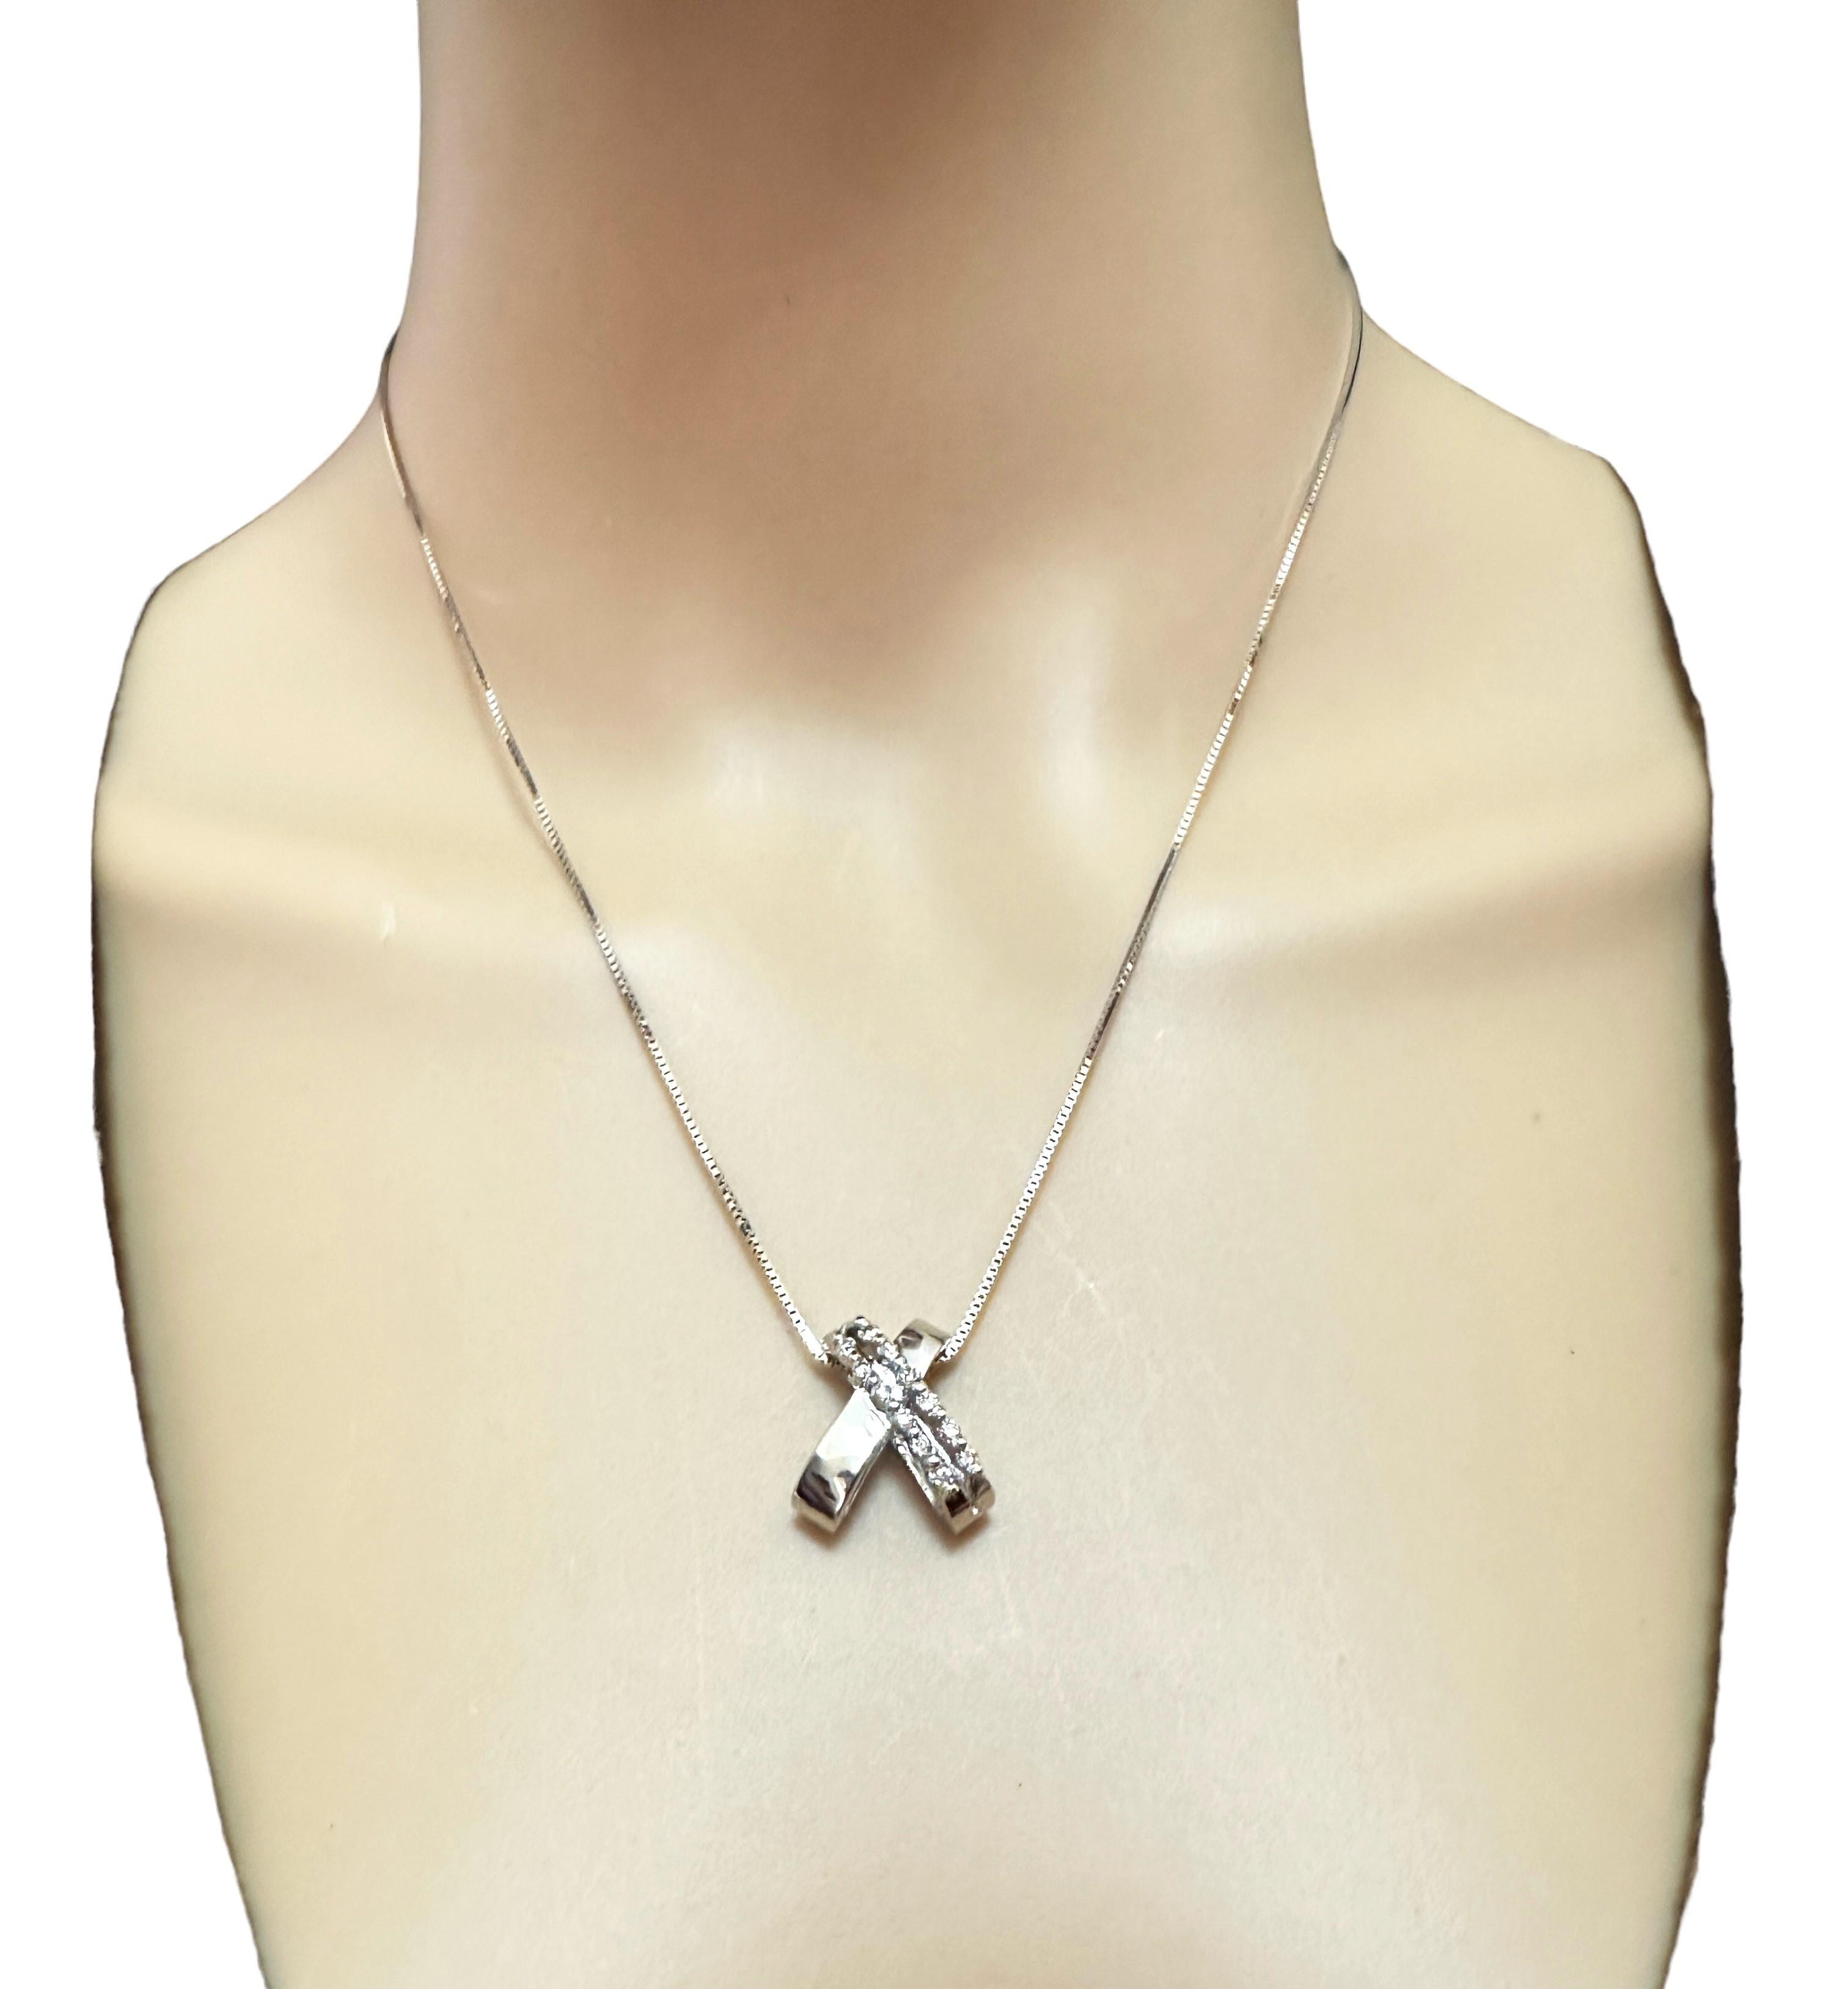 14k White Gold Diamond Crossover Pendant w 14k Chain & Appraisal In Excellent Condition For Sale In Eagan, MN